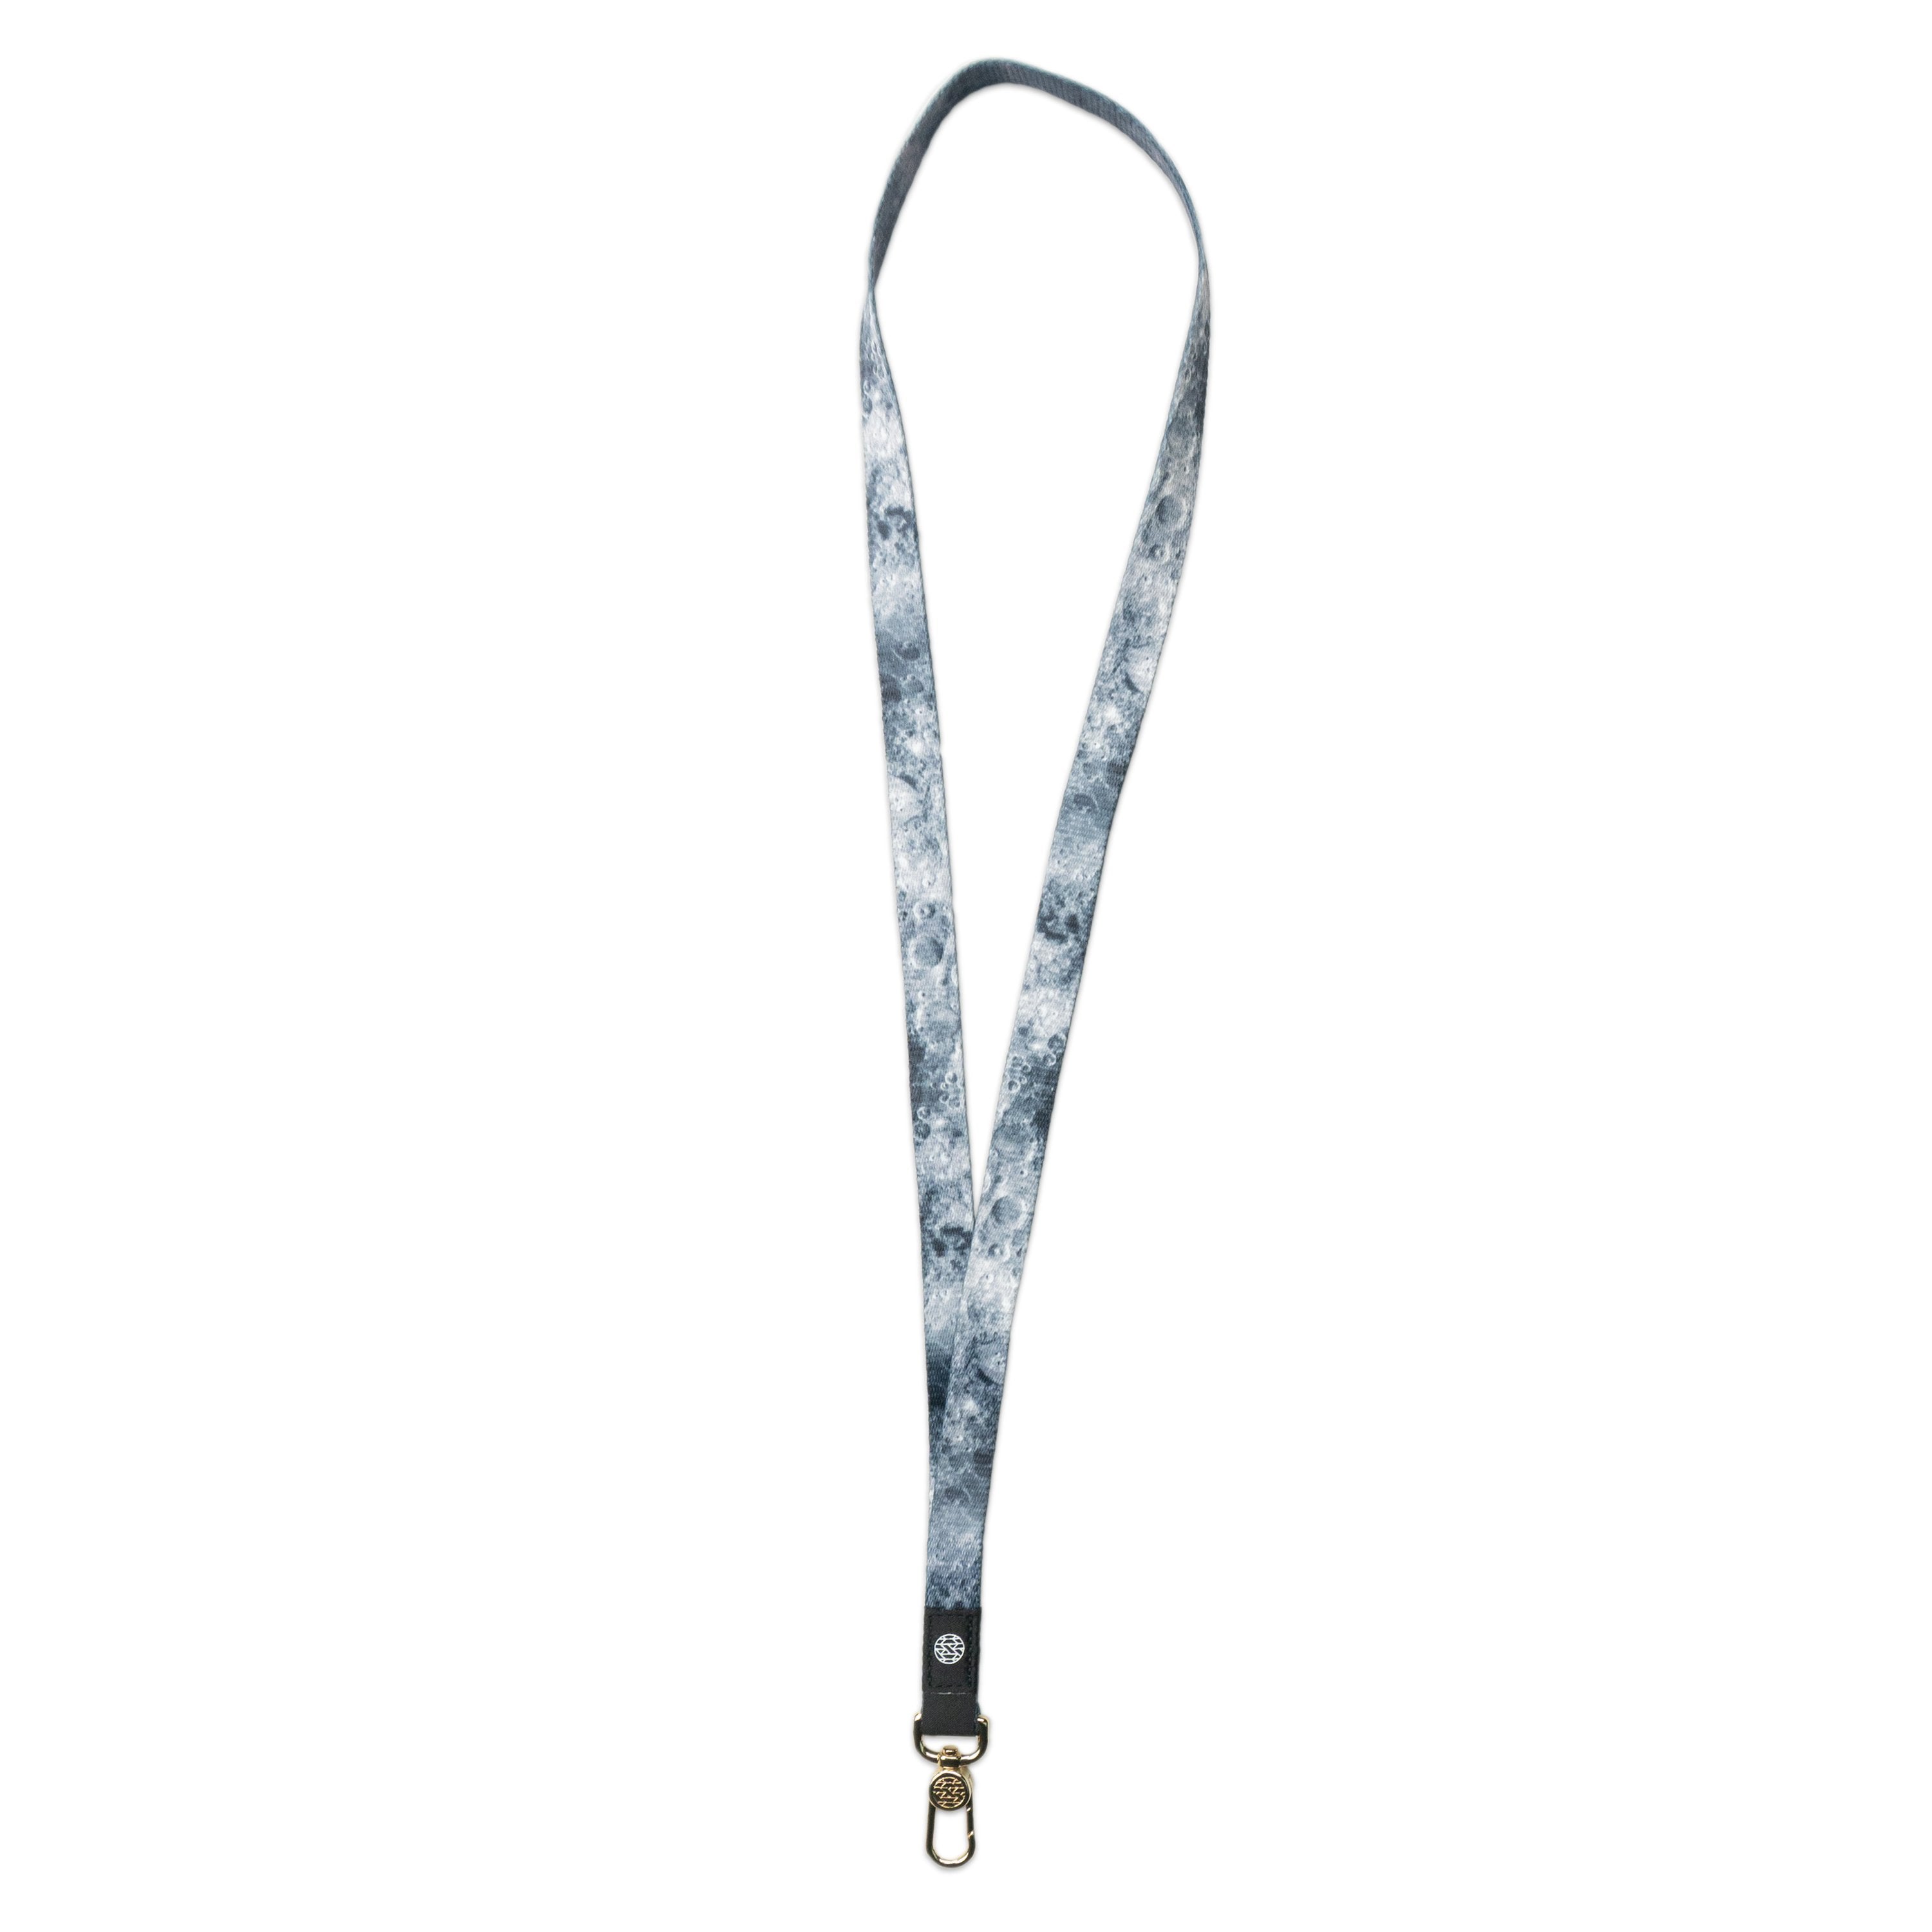 A product image of a ZOX lanyard showing the front of the design with a gold colored metal clip. The lanyard is called Moon and the design is an image of the moon's surface that is mainly grey and black